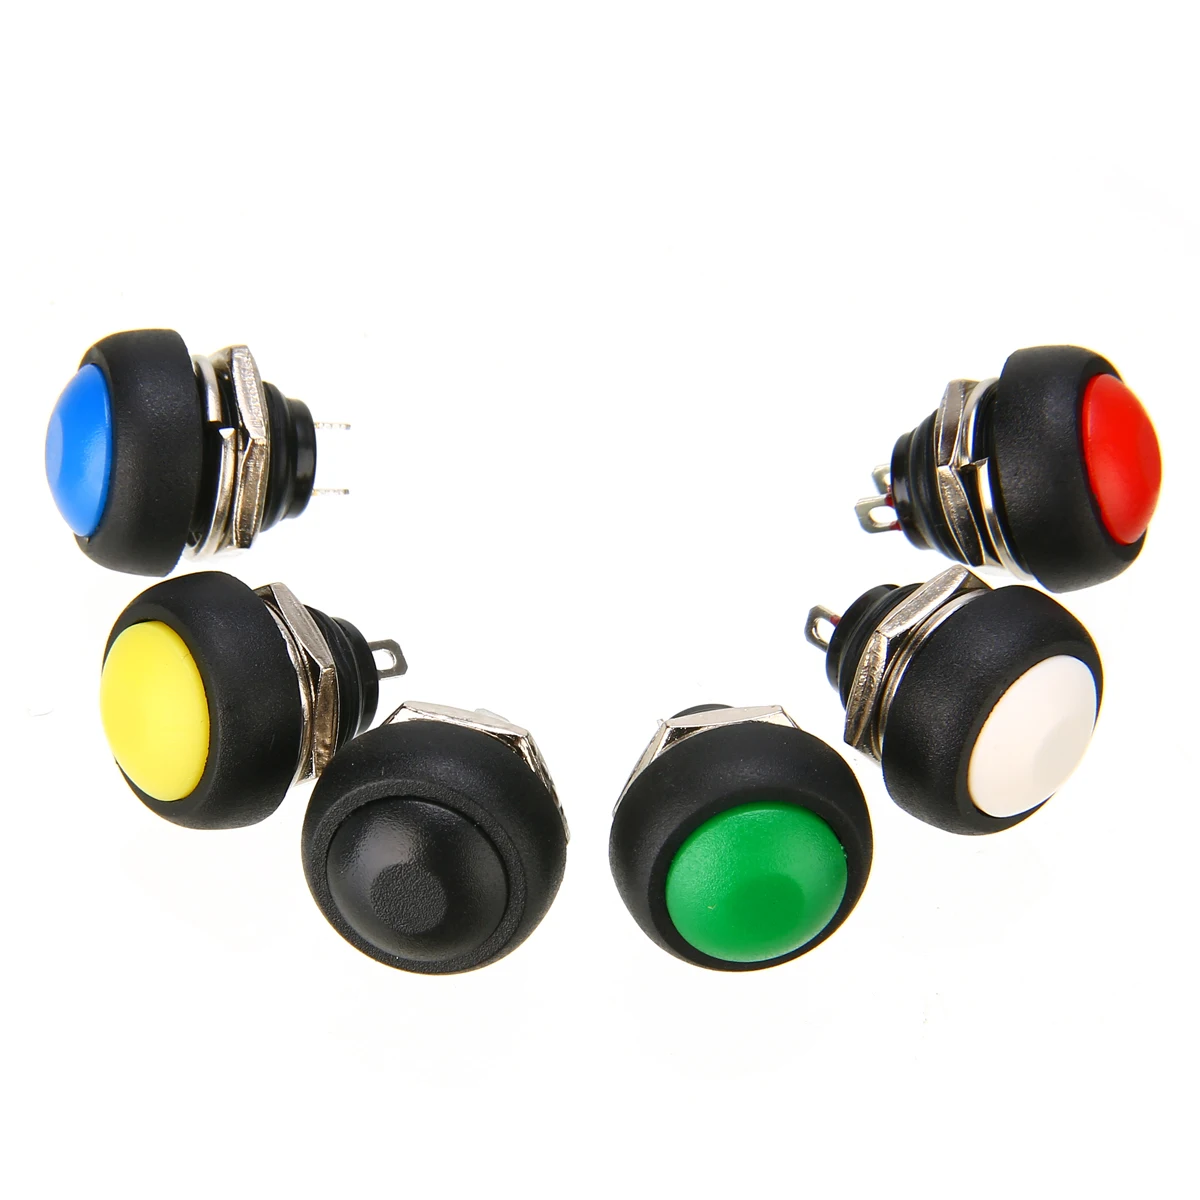 5 X Black 12mm Mini Momentary ON//OFF Round Push Button Toggle Switch Sales